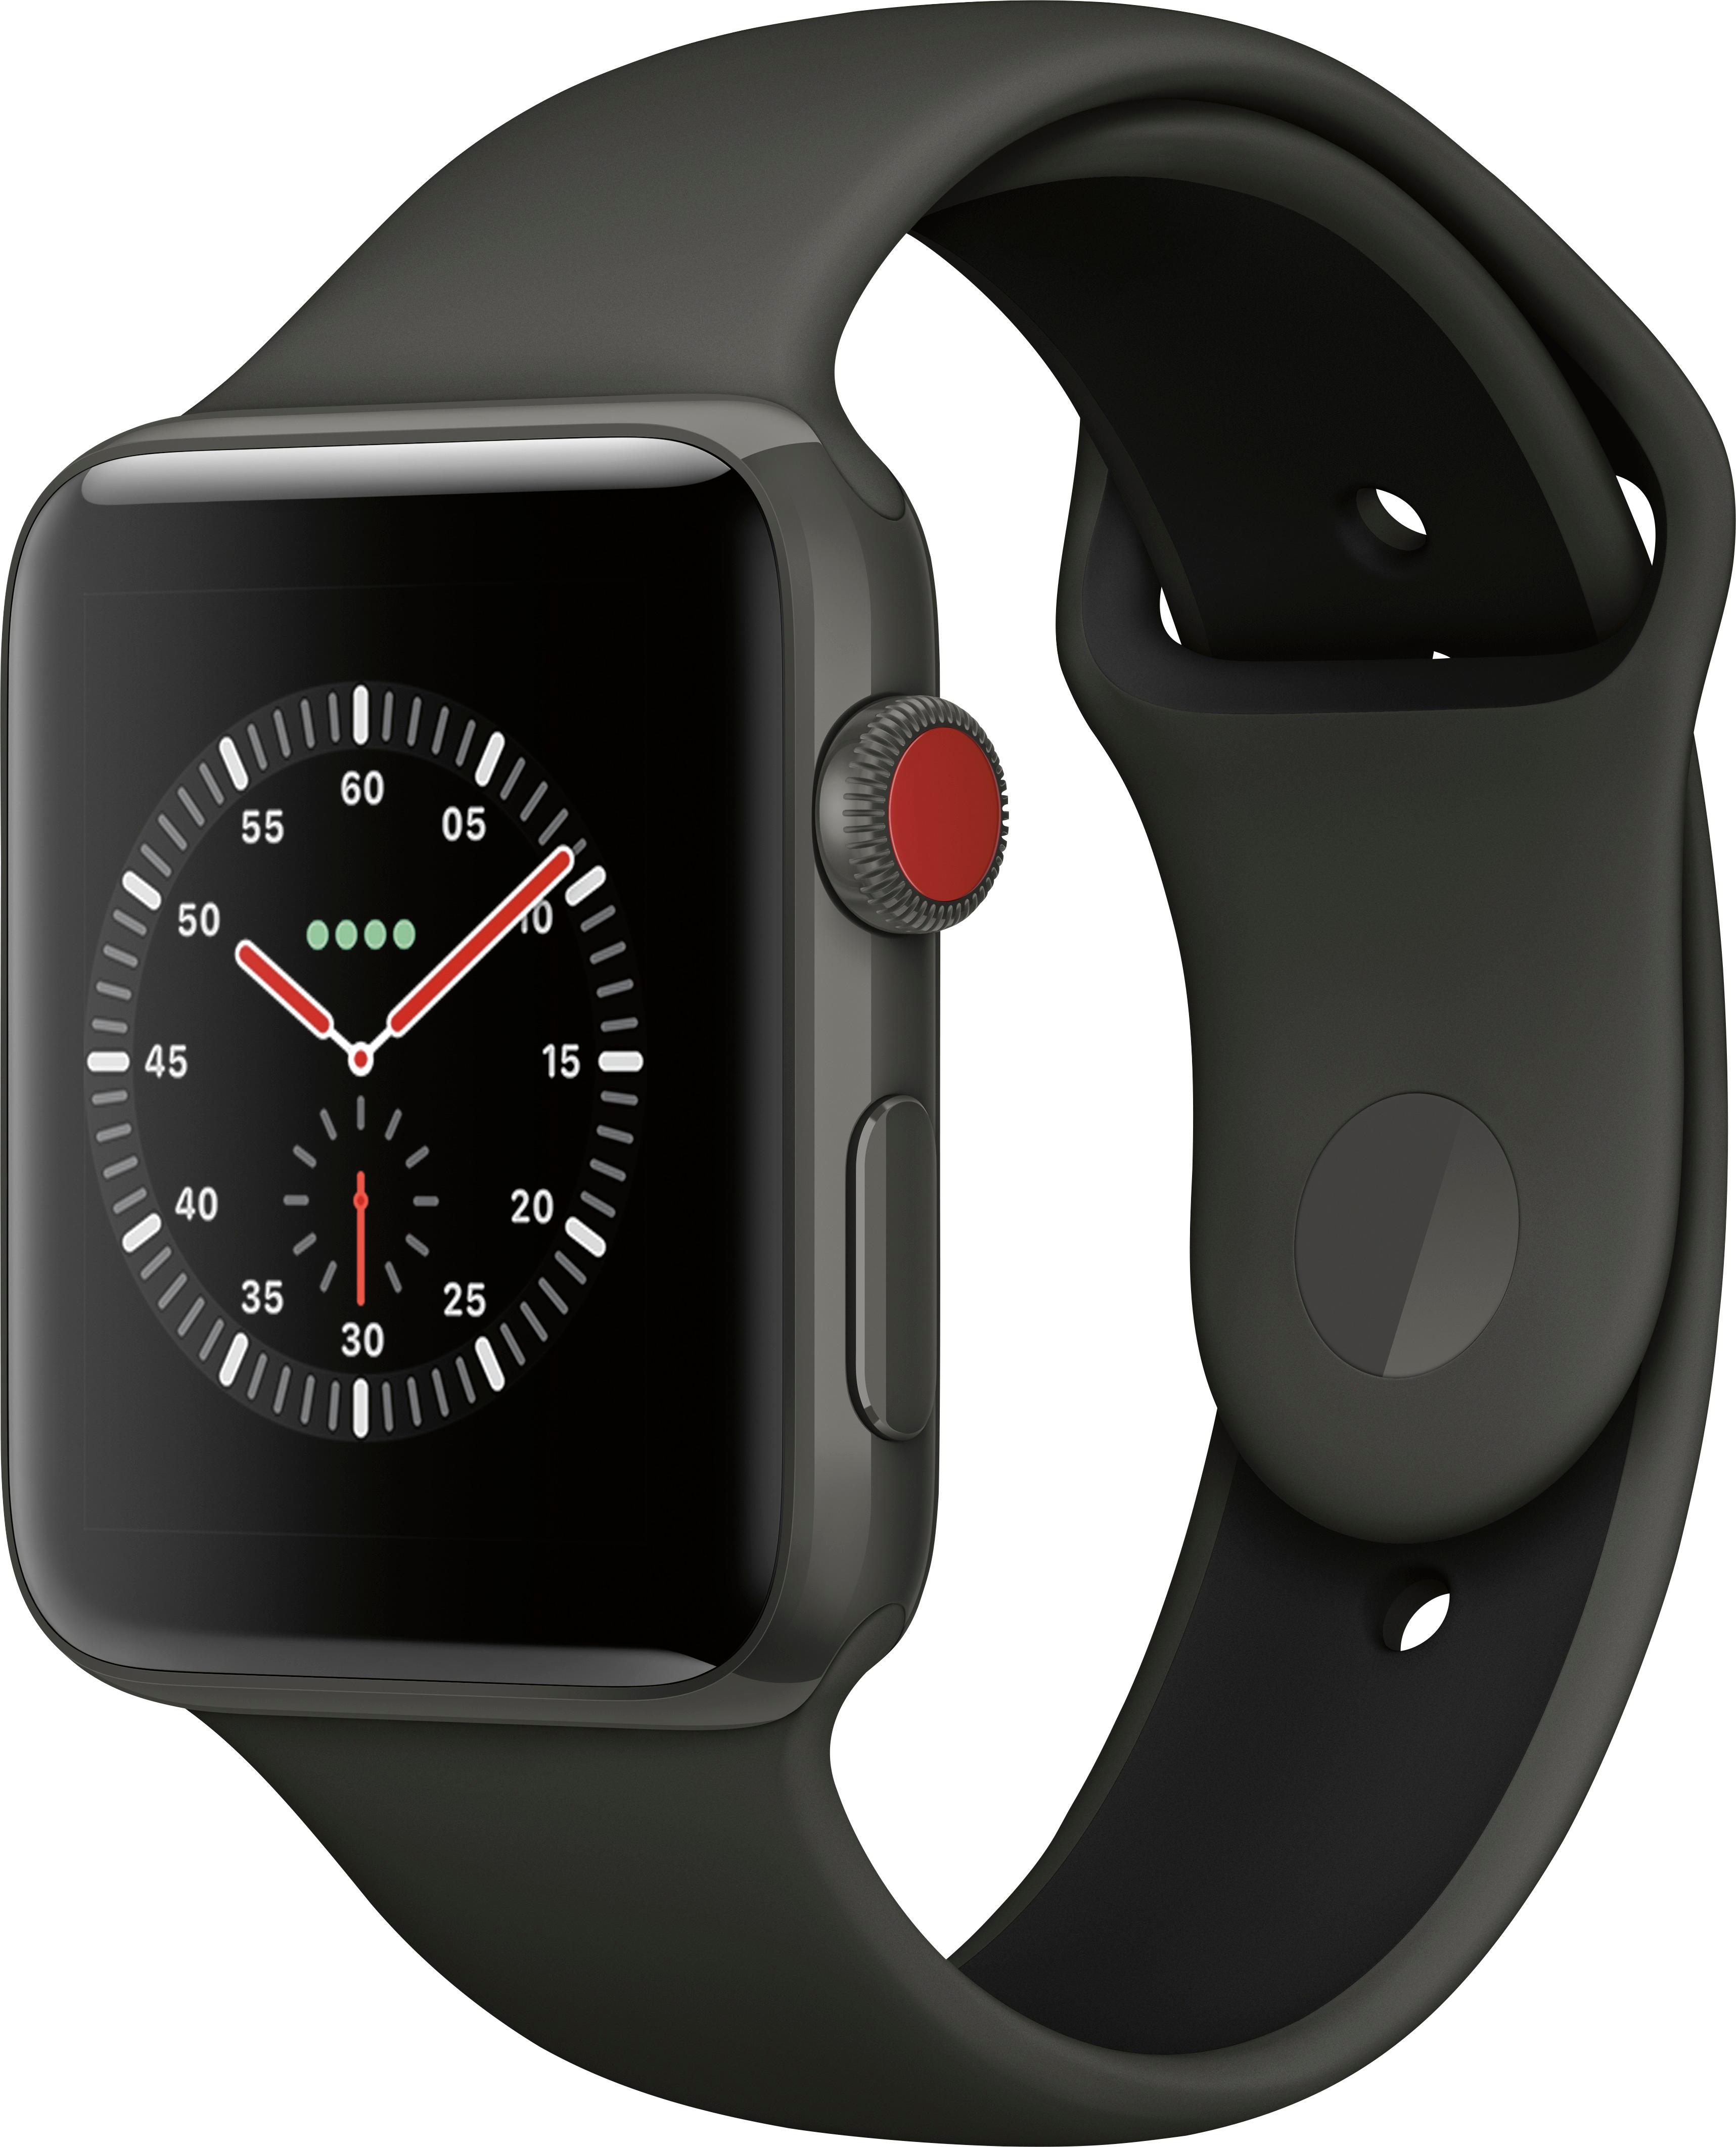 Angle View: Apple Watch Series 4 (GPS + Cellular) 44mm Space Gray Aluminum Case with Black Sport Band - Space Gray Aluminum